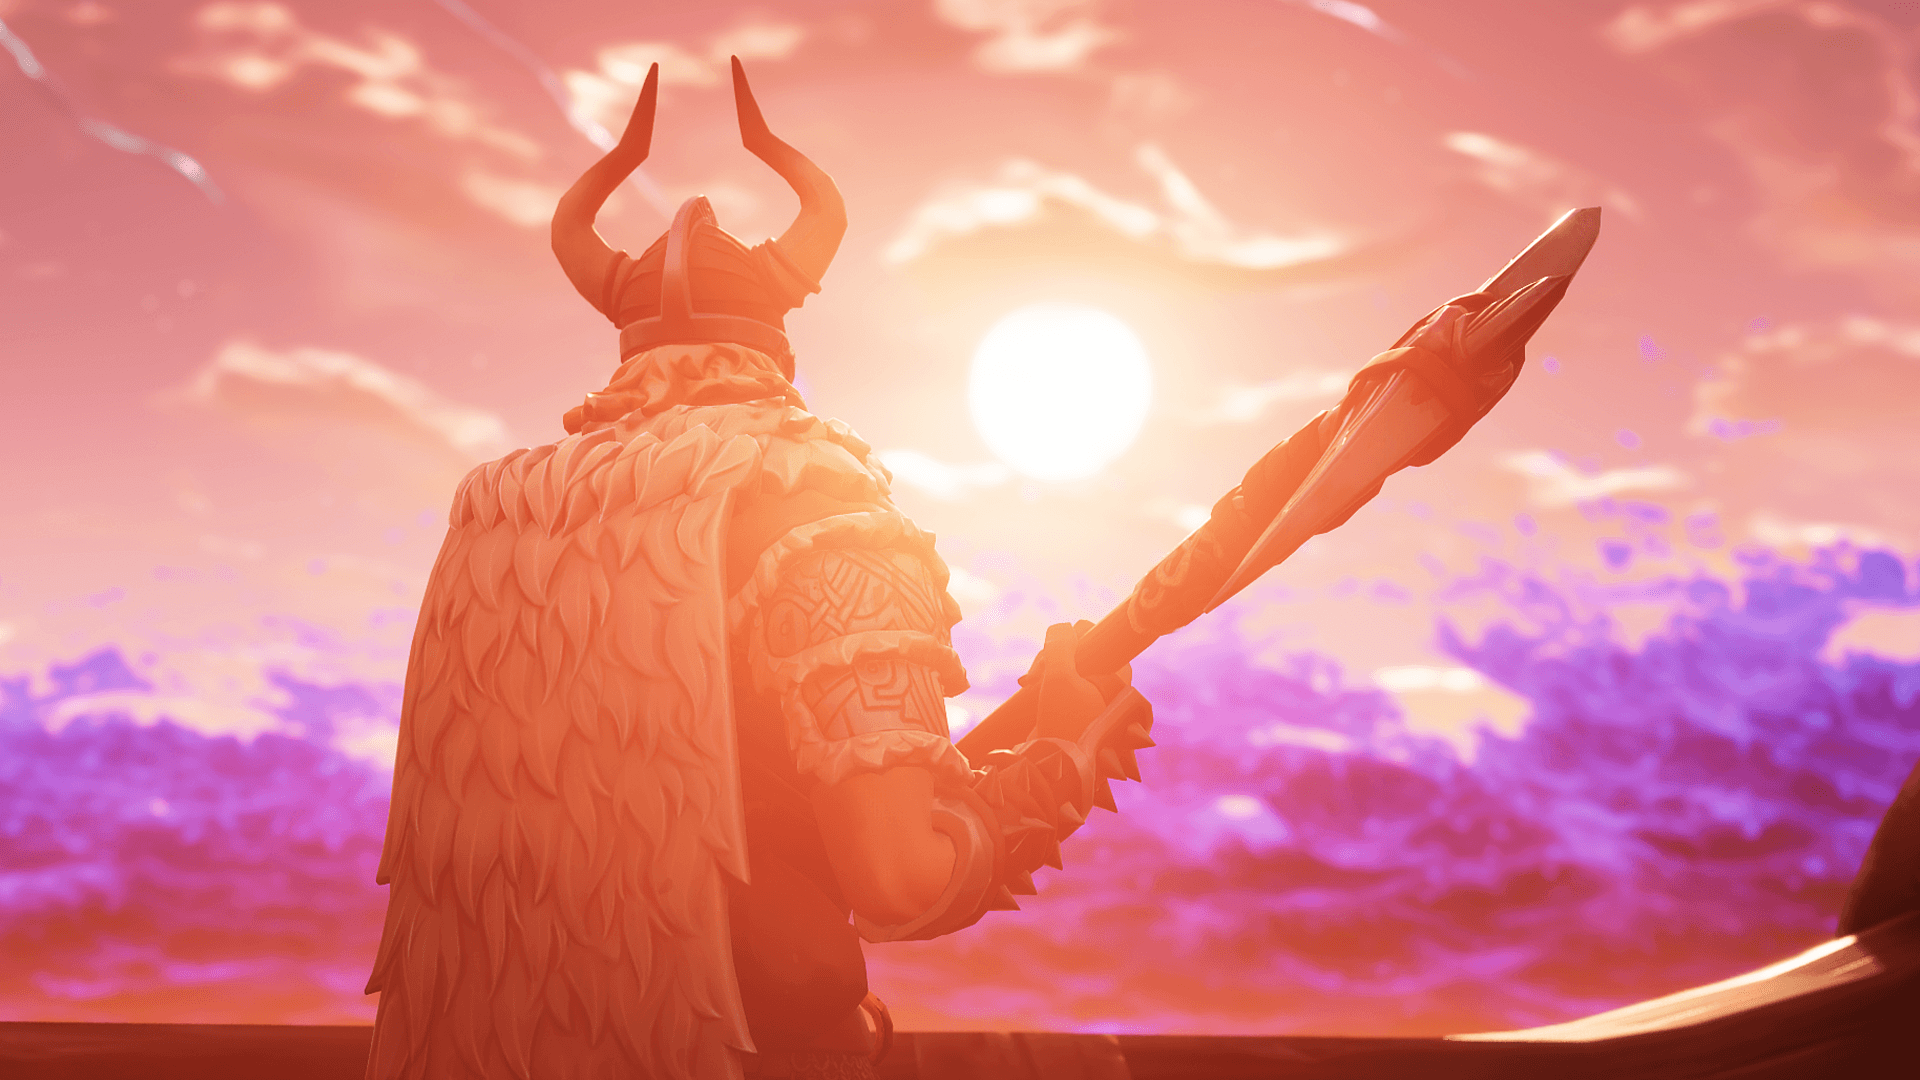 Here's a screenshot I took of Magnus while filming his cinematic